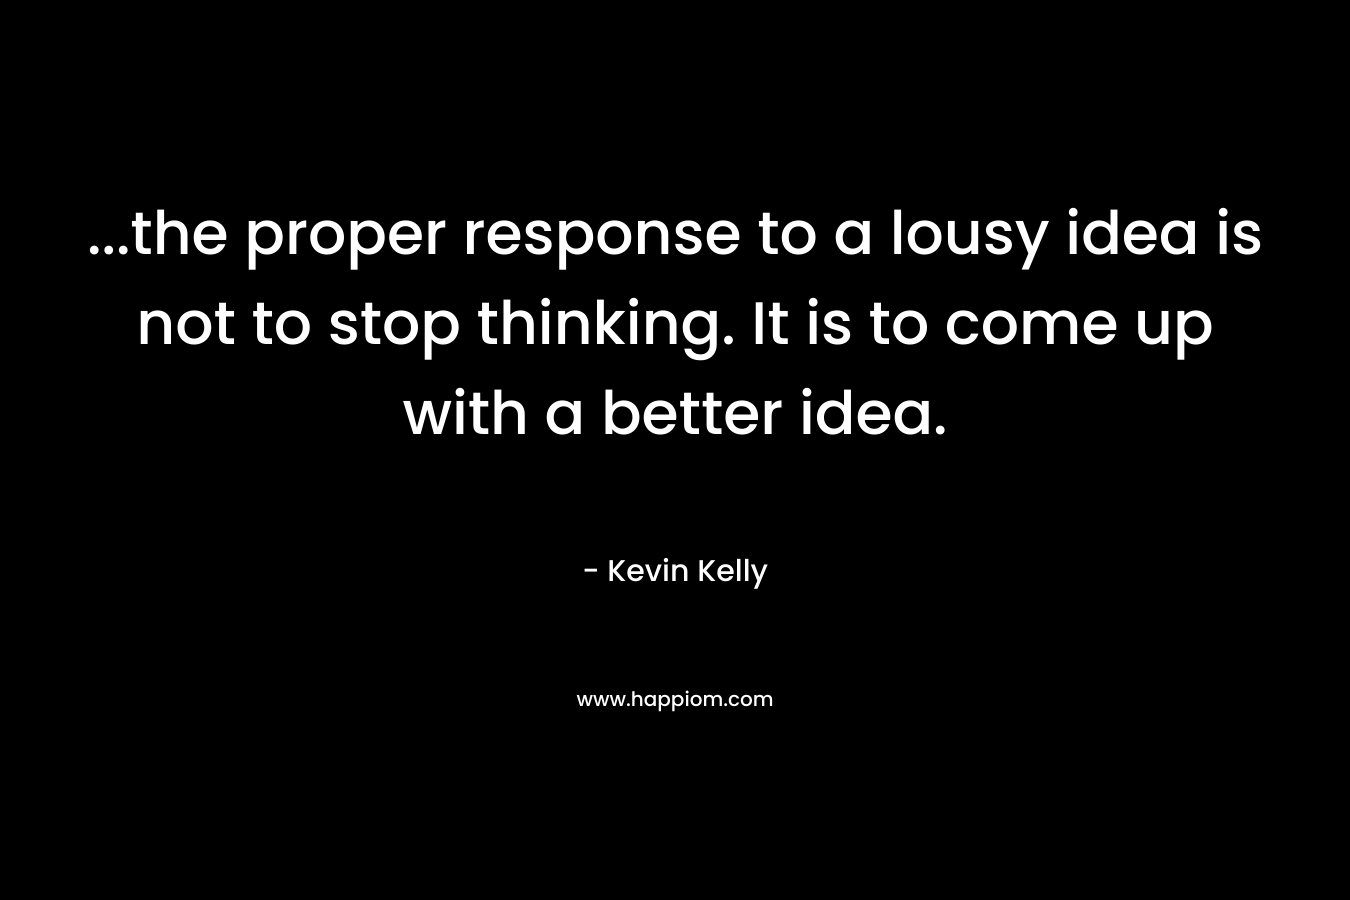 ...the proper response to a lousy idea is not to stop thinking. It is to come up with a better idea.